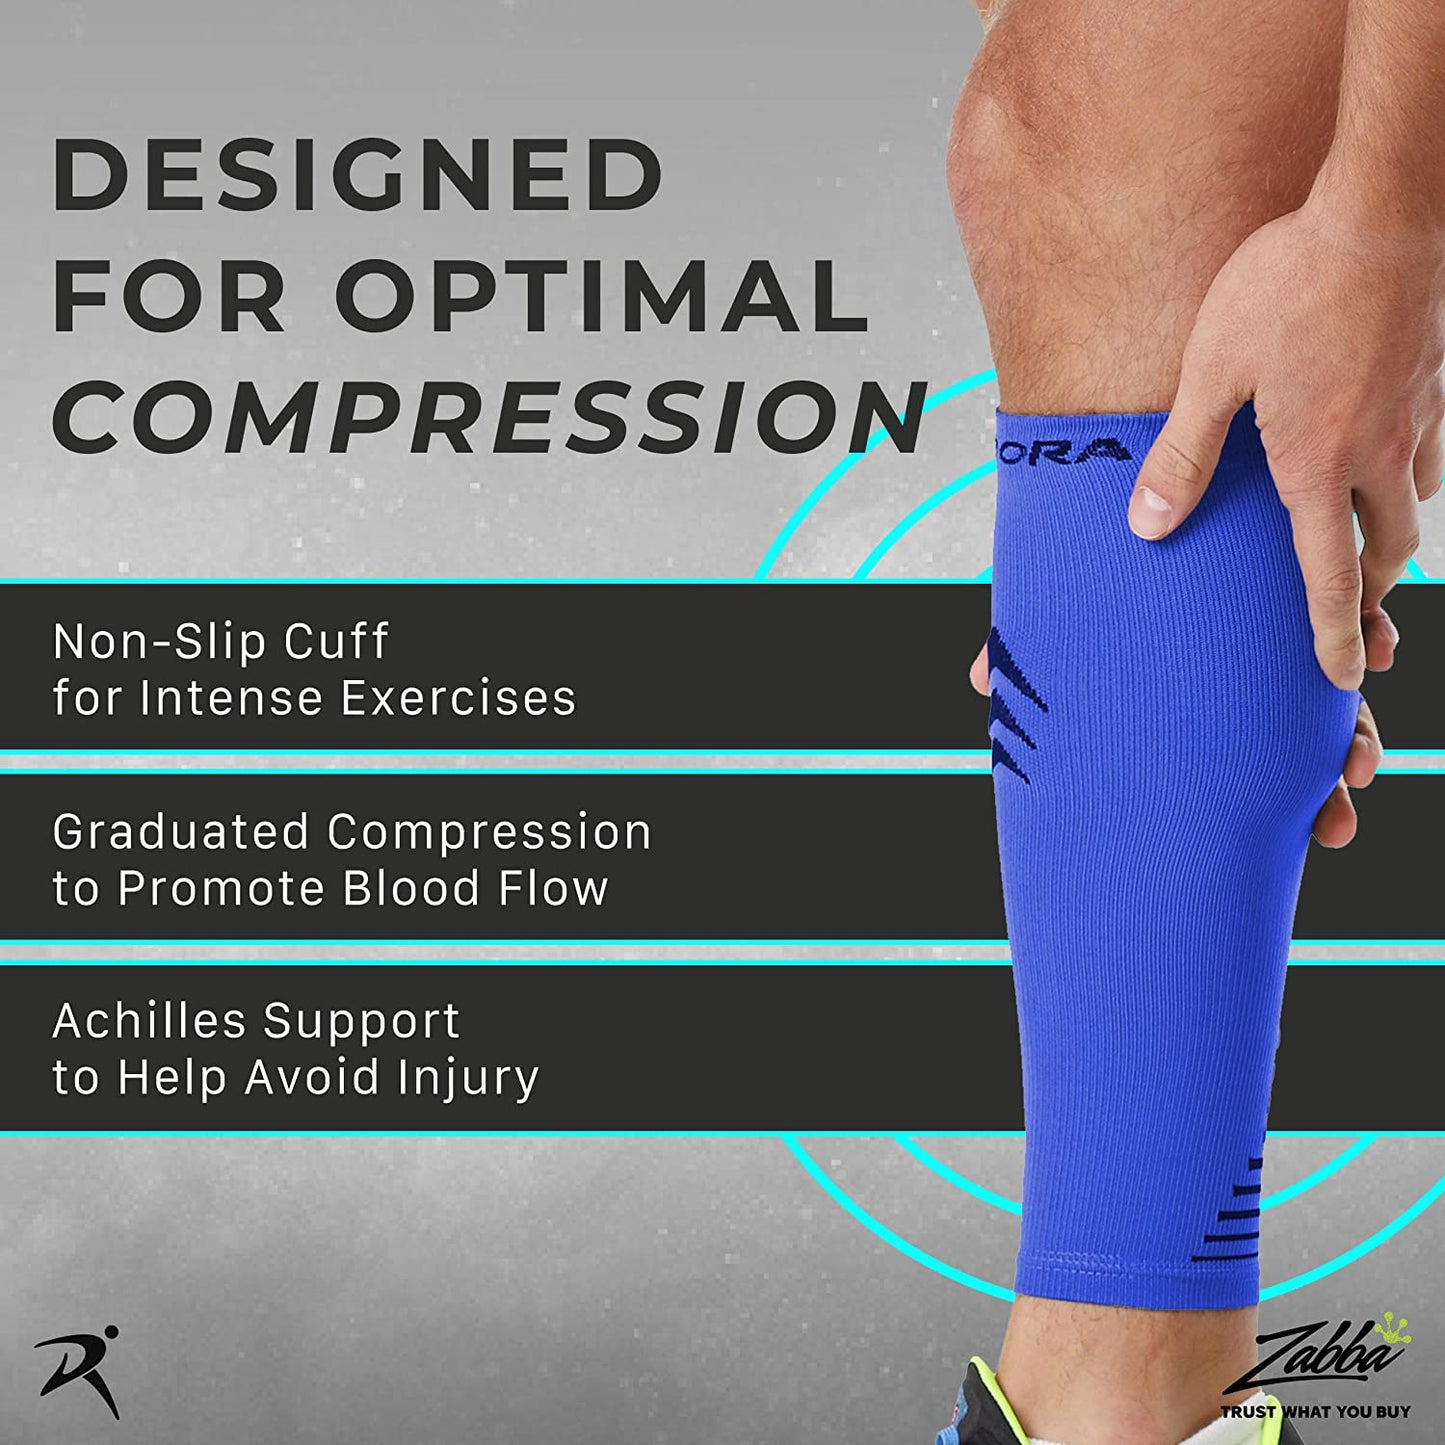 Kickin' Comfort Leg Hugs: Say Goodbye to Aching Limbs with Mr. Flex's Supportive Leg Compression Sleeves!